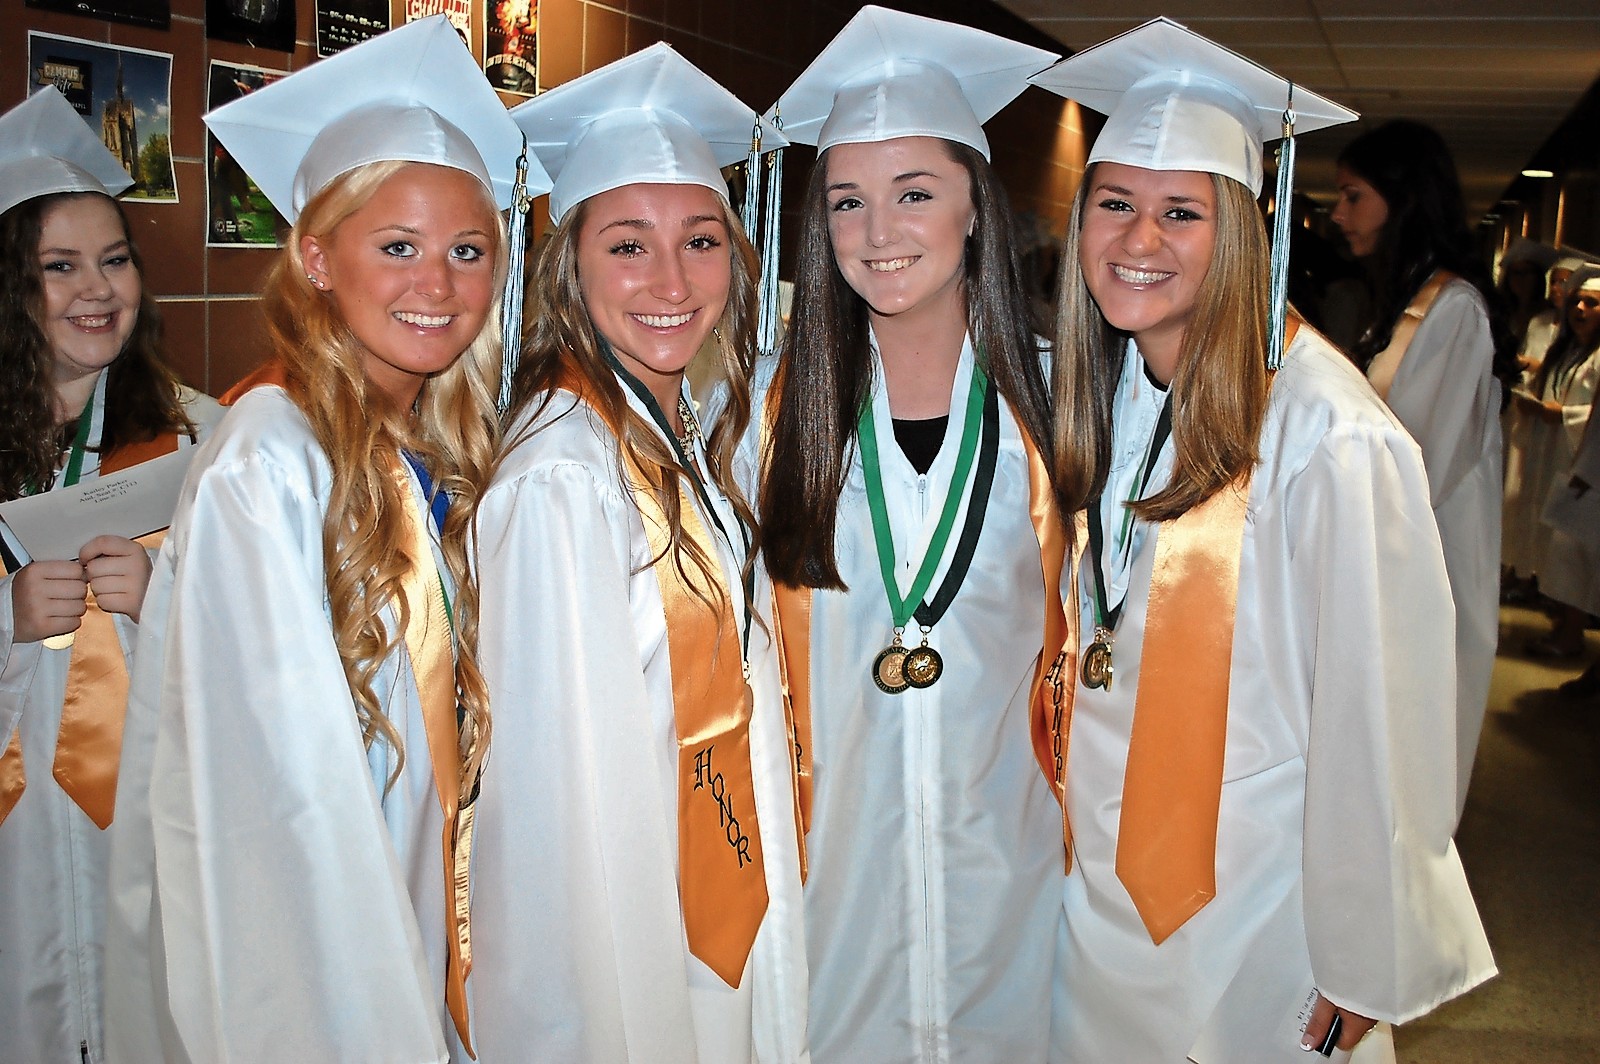 Seaford graduates, from left, Jennfier Hughes, Ashley Casazza, Erin Russell and Molly Van Dusen awaited the start of the ceremony.